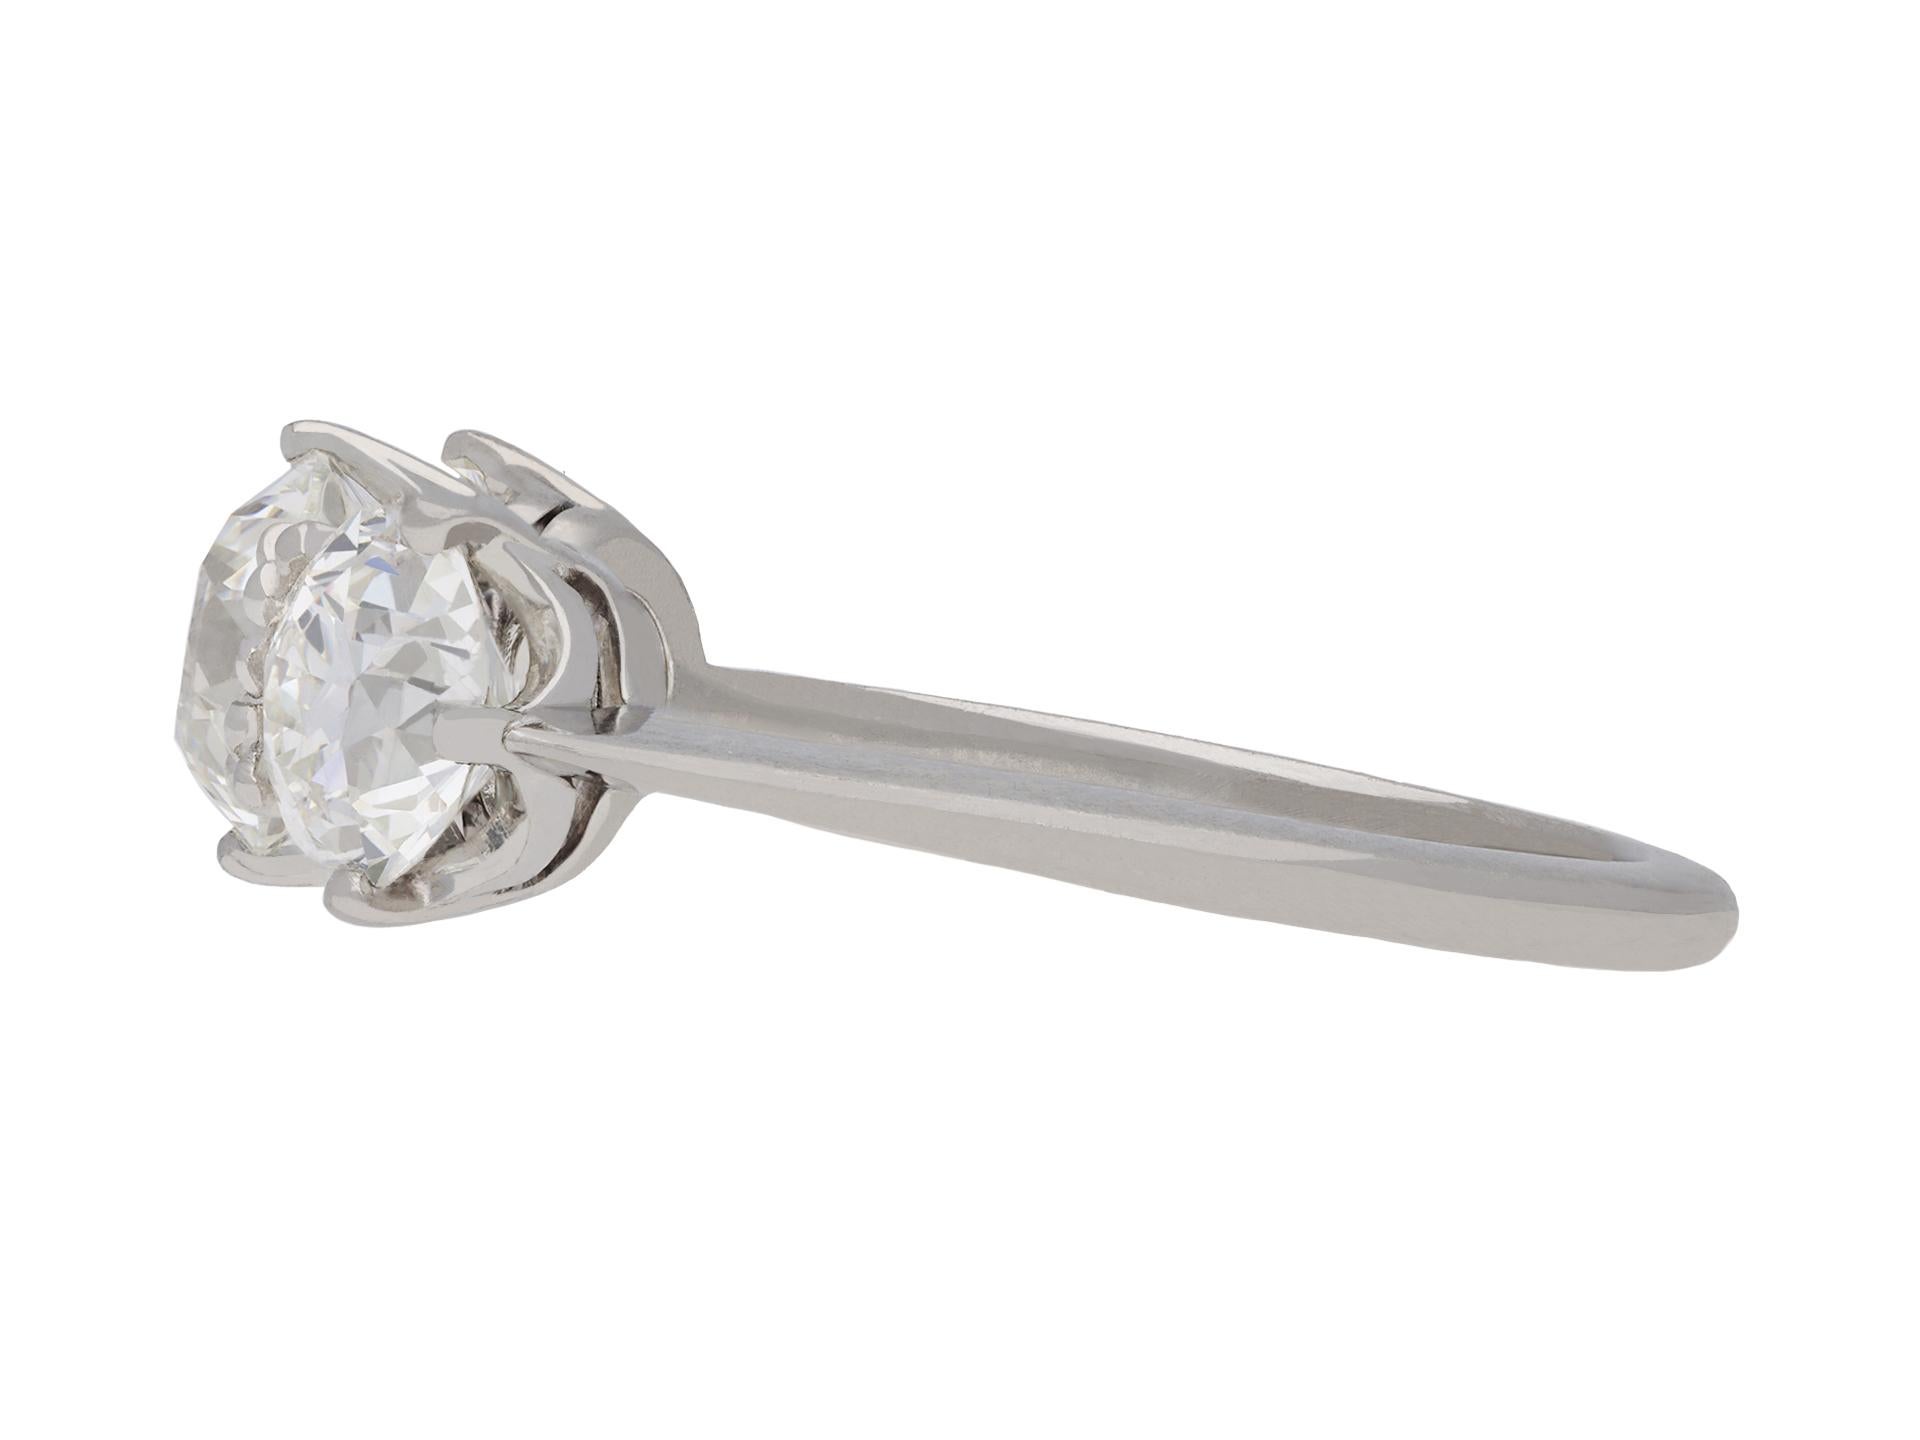 Edwardian diamond three stone ring. Set centrally with a round old cut diamond, H colour, VS1 clarity, with a weight of 1.04 carats in an open back claw setting, flanked by two round old cut diamonds, one H colour, VS1 clarity, with a weight of 0.76